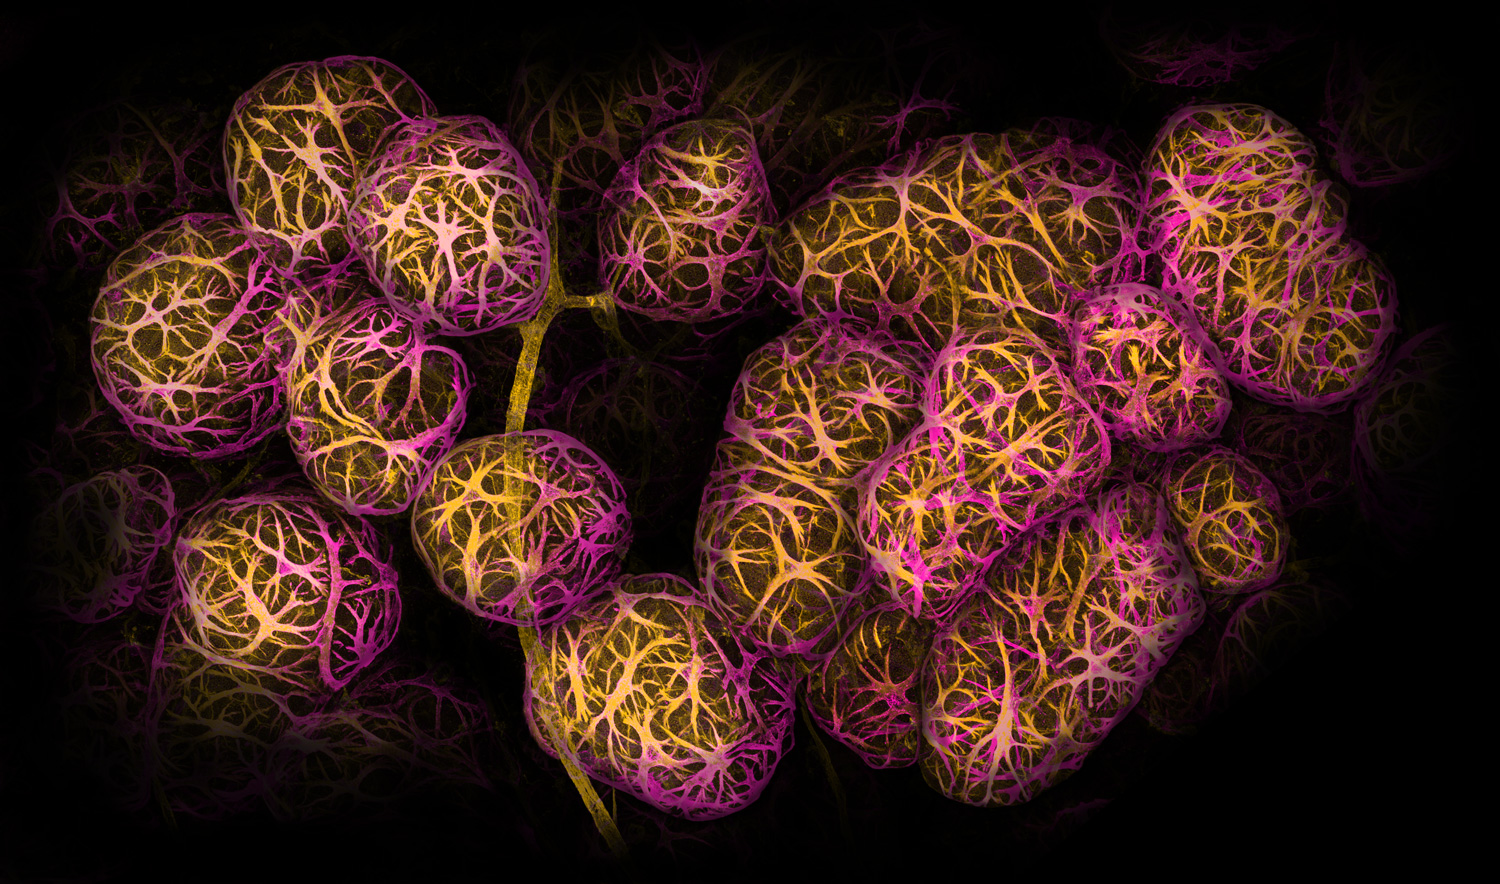 magenta and yellow colored ball-like structures clustered around a blood vessel, colored yellow, against a black background